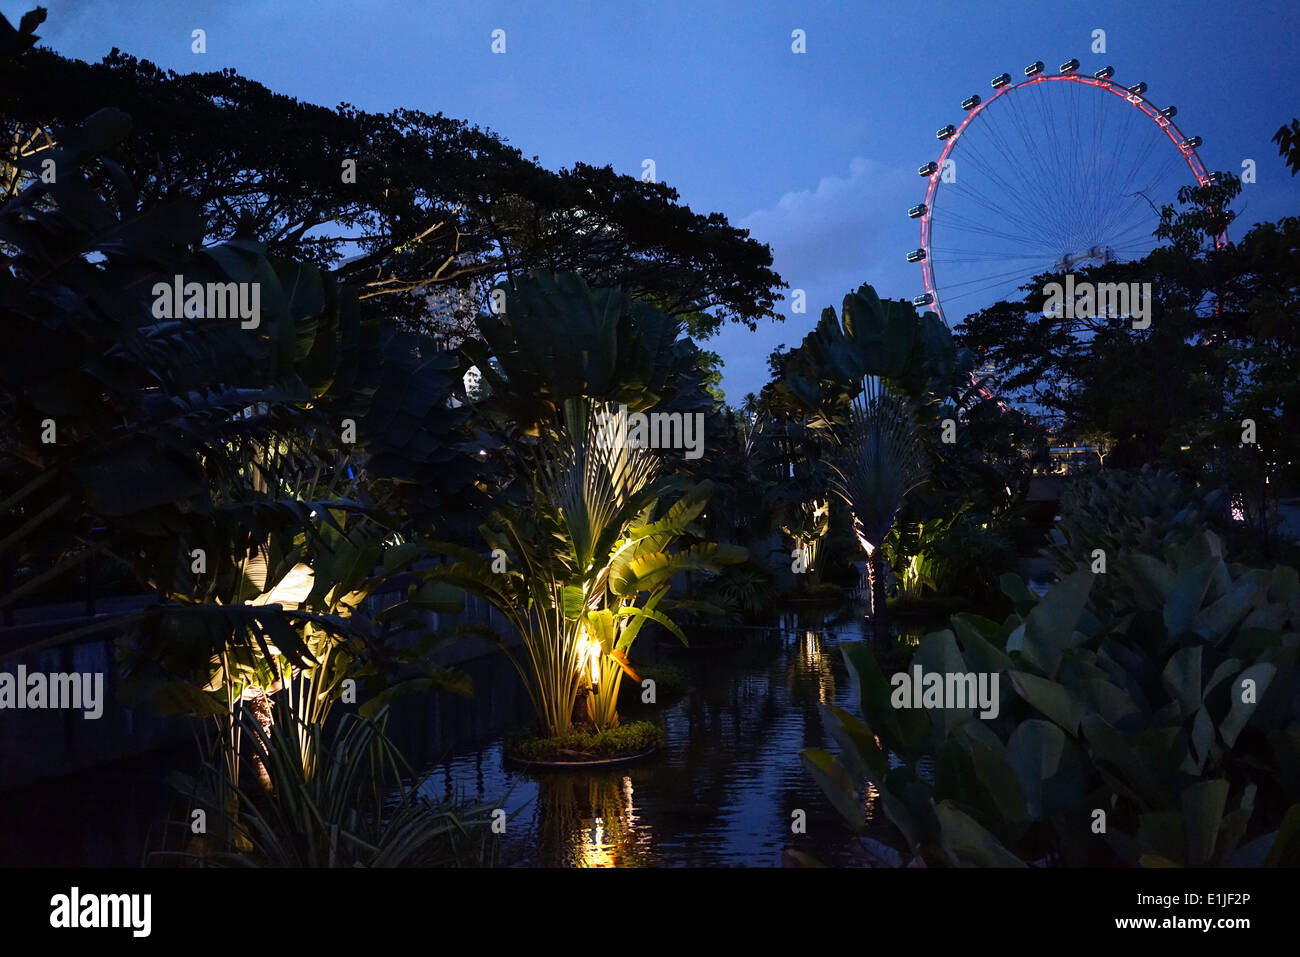 View of the Singapore Flyer - the world’s largest observation wheel from the Gardens by the Bay at dusk. Stock Photo